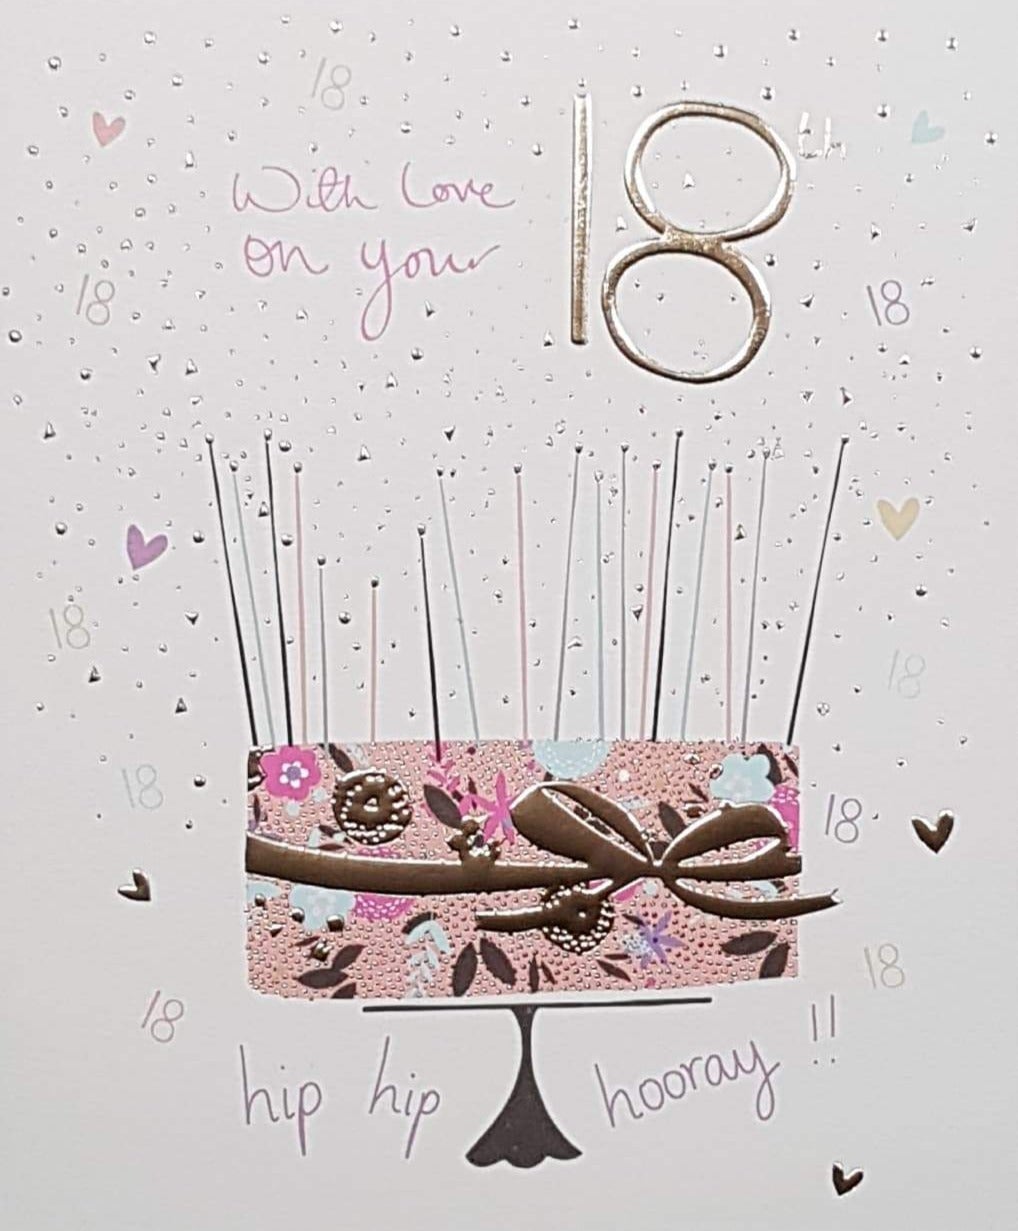 Age 18 Birthday Card - A Birthday Cake With A Shiny Gold Bow